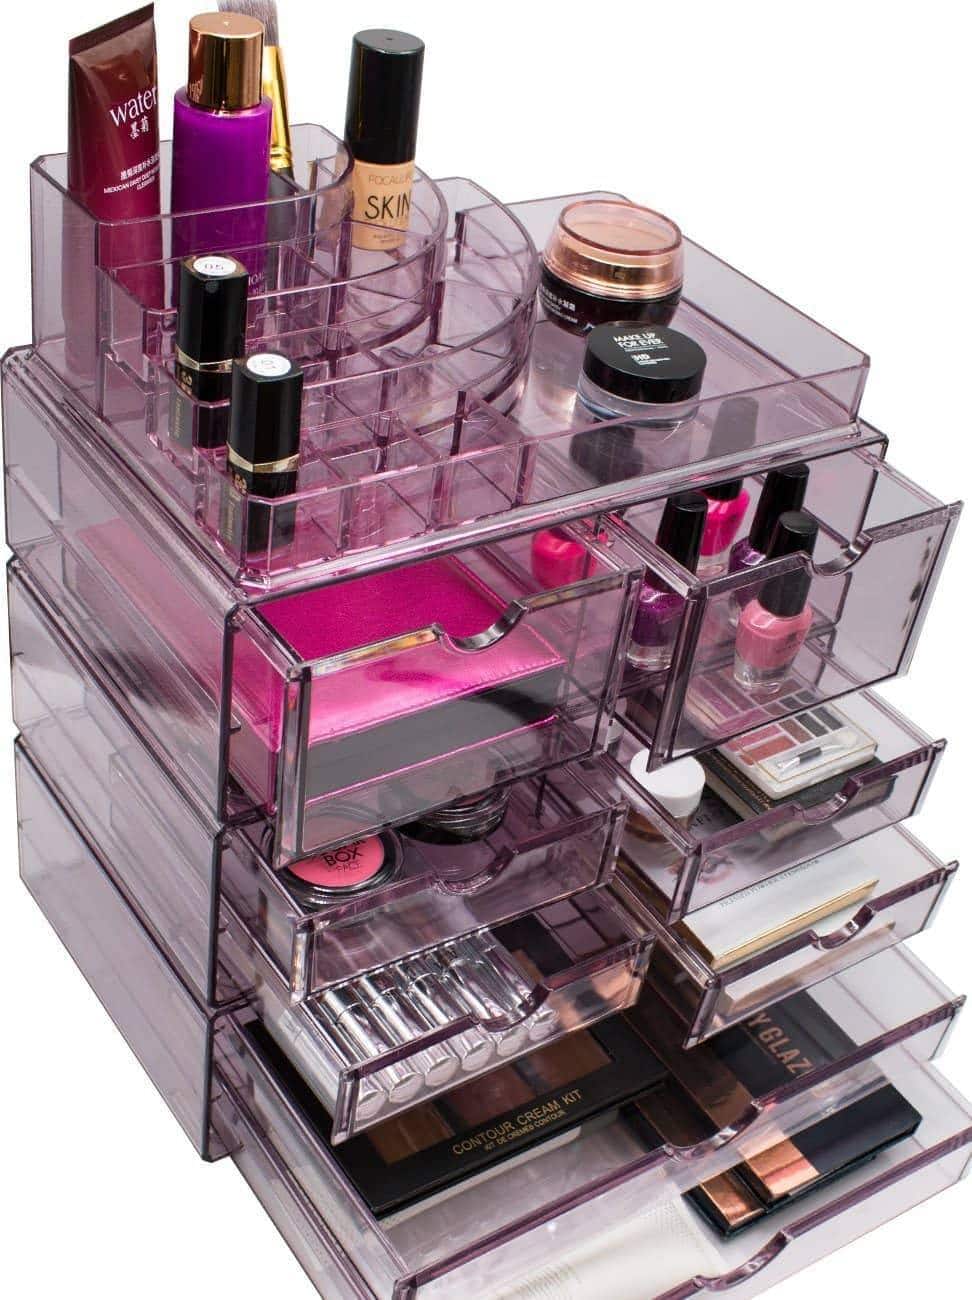 Heavy duty sorbus acrylic cosmetics makeup and jewelry storage case x large display sets interlocking scoop drawers to create your own specially designed makeup counter stackable and interchangeable purple 1